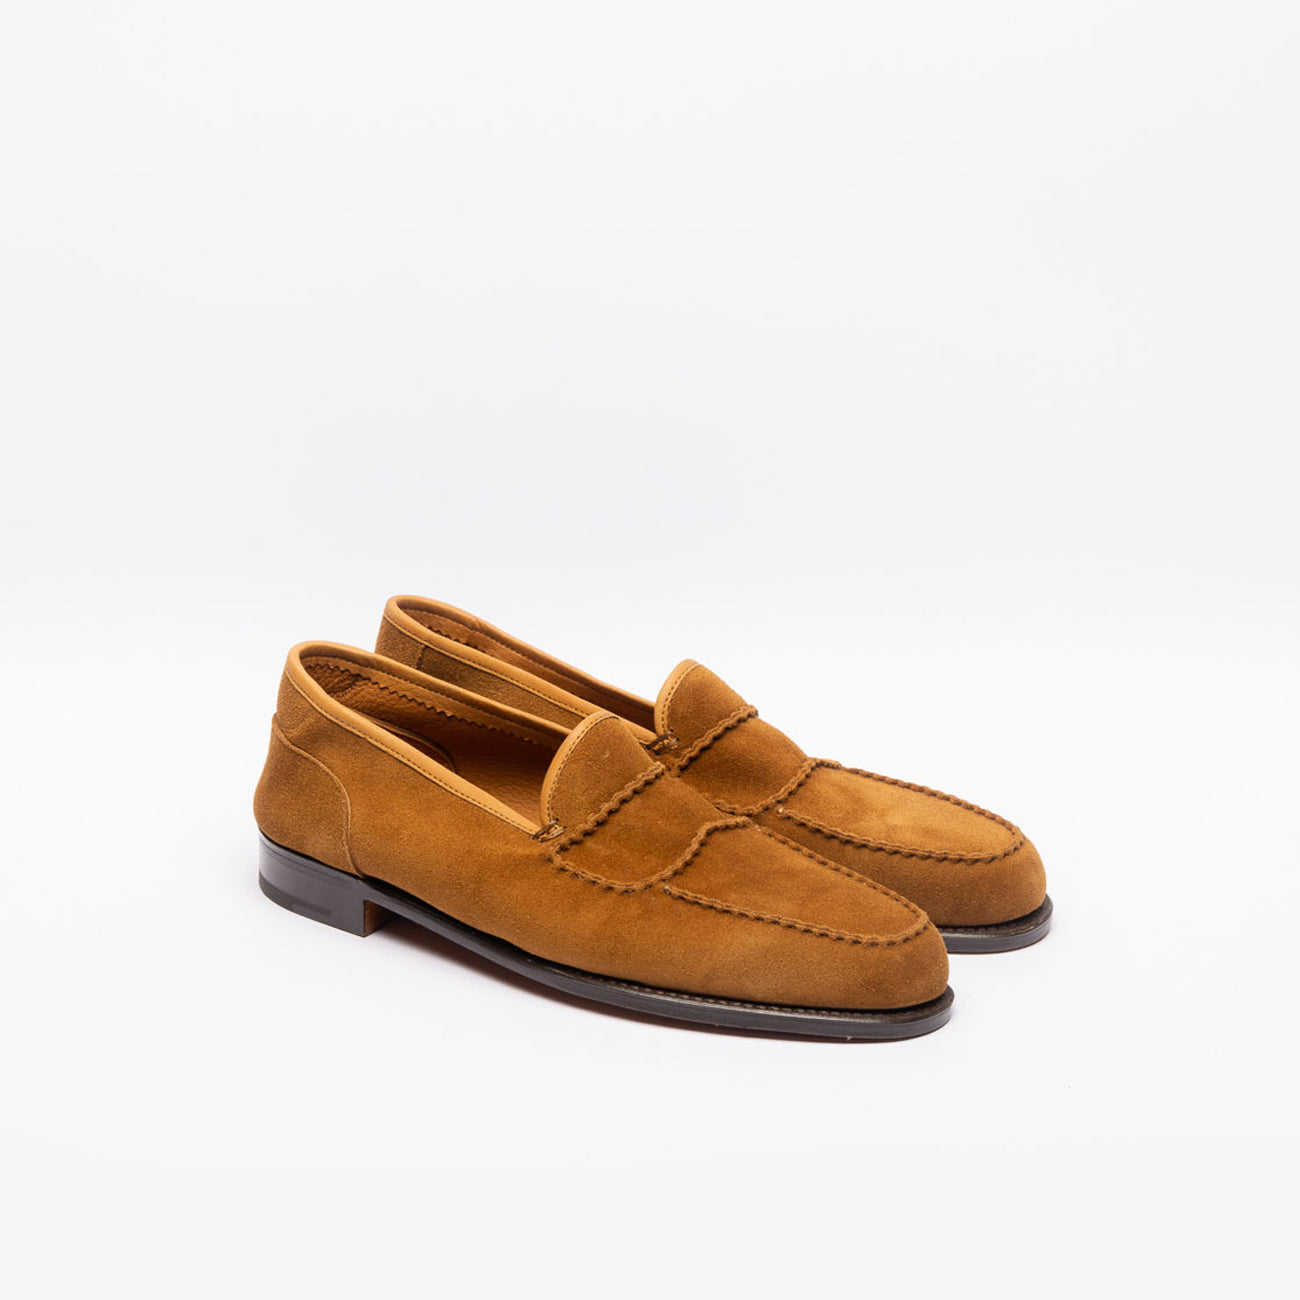 John Lobb Bath unlined penny loafer in brown suede (Tobacco suede)